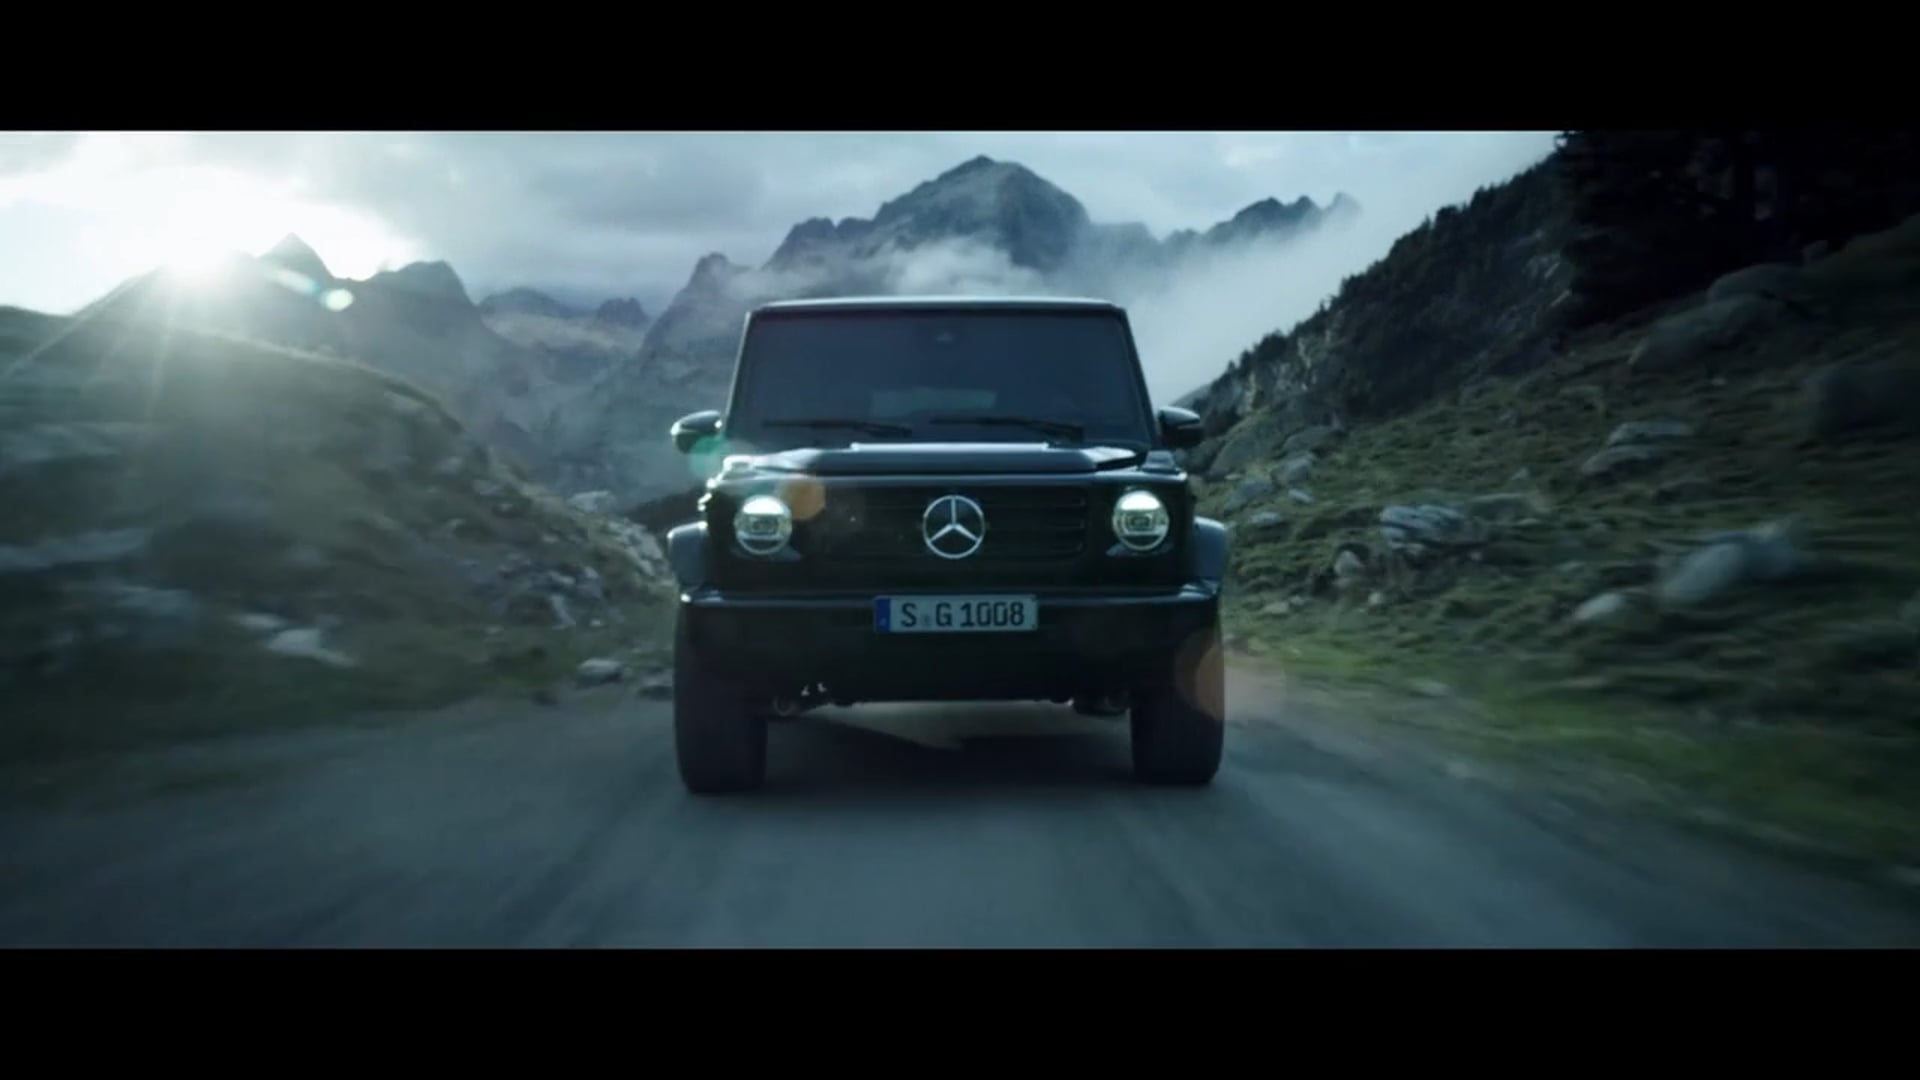 MB G-Class Stronger than Time